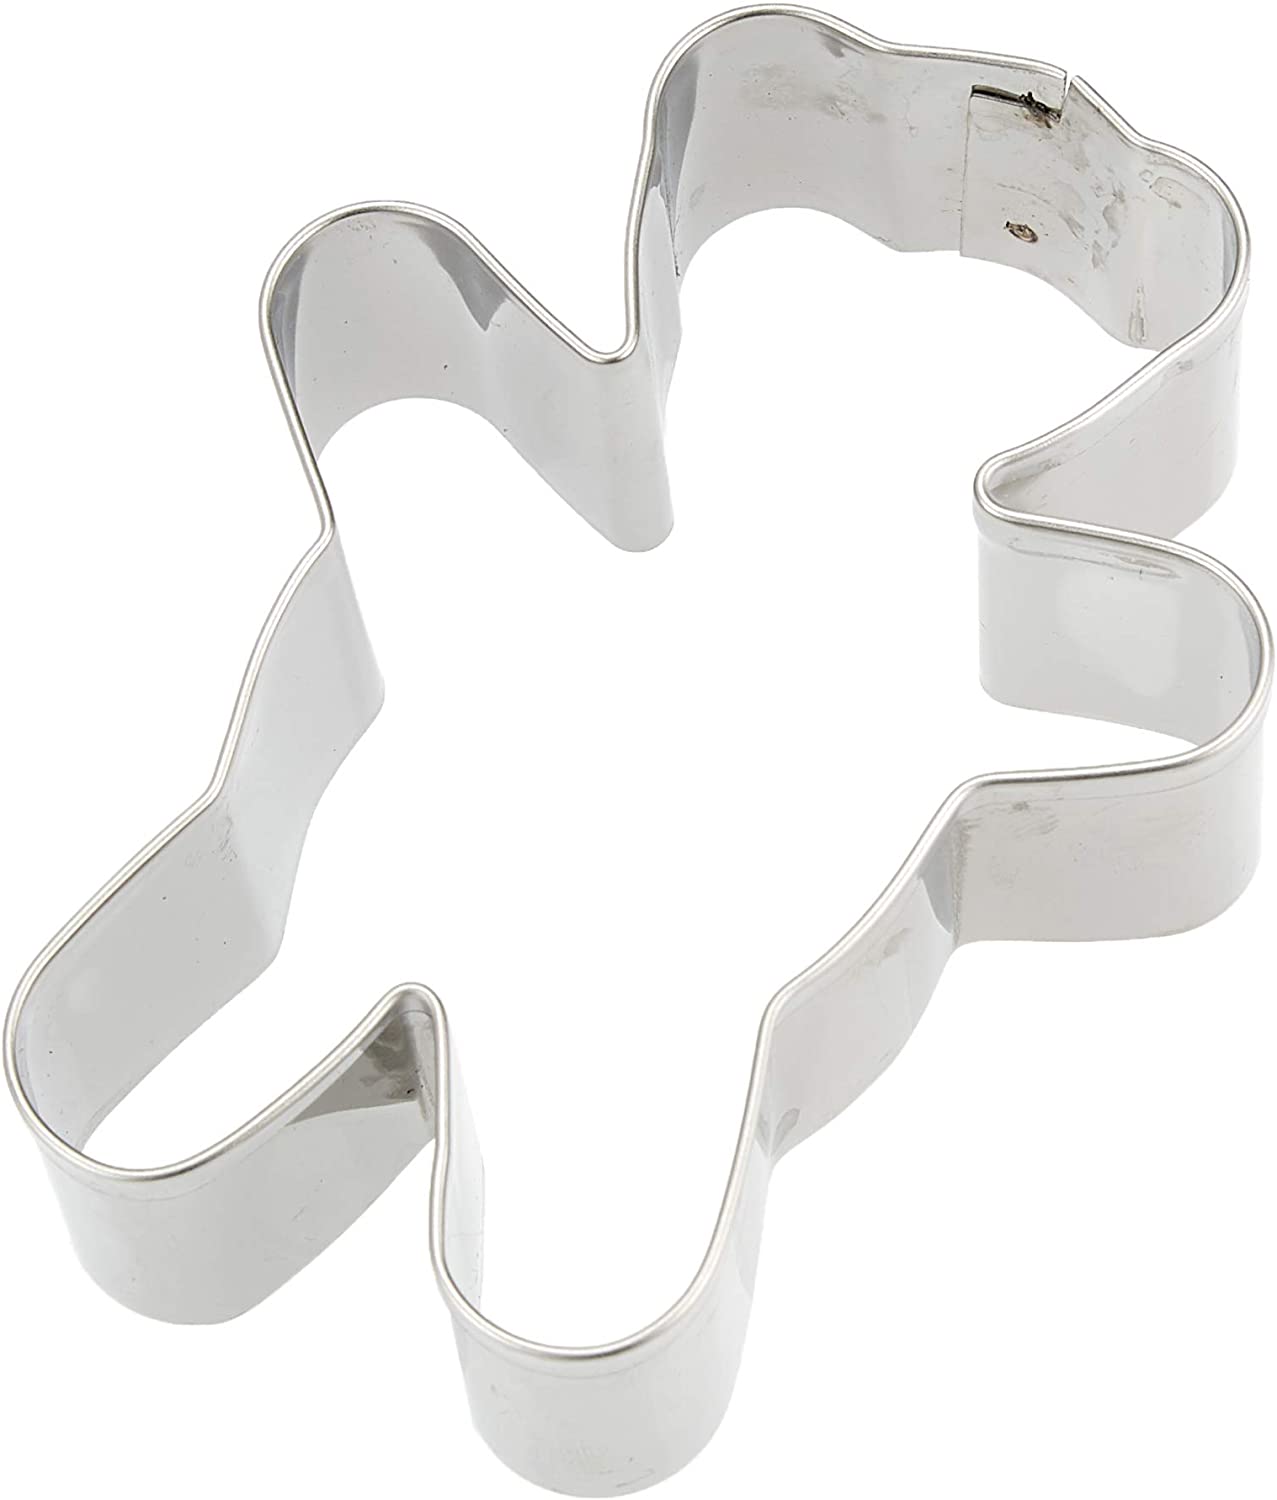 Staedter NEW Cookie cutter stainless steel, Teddy Bear 7 cm